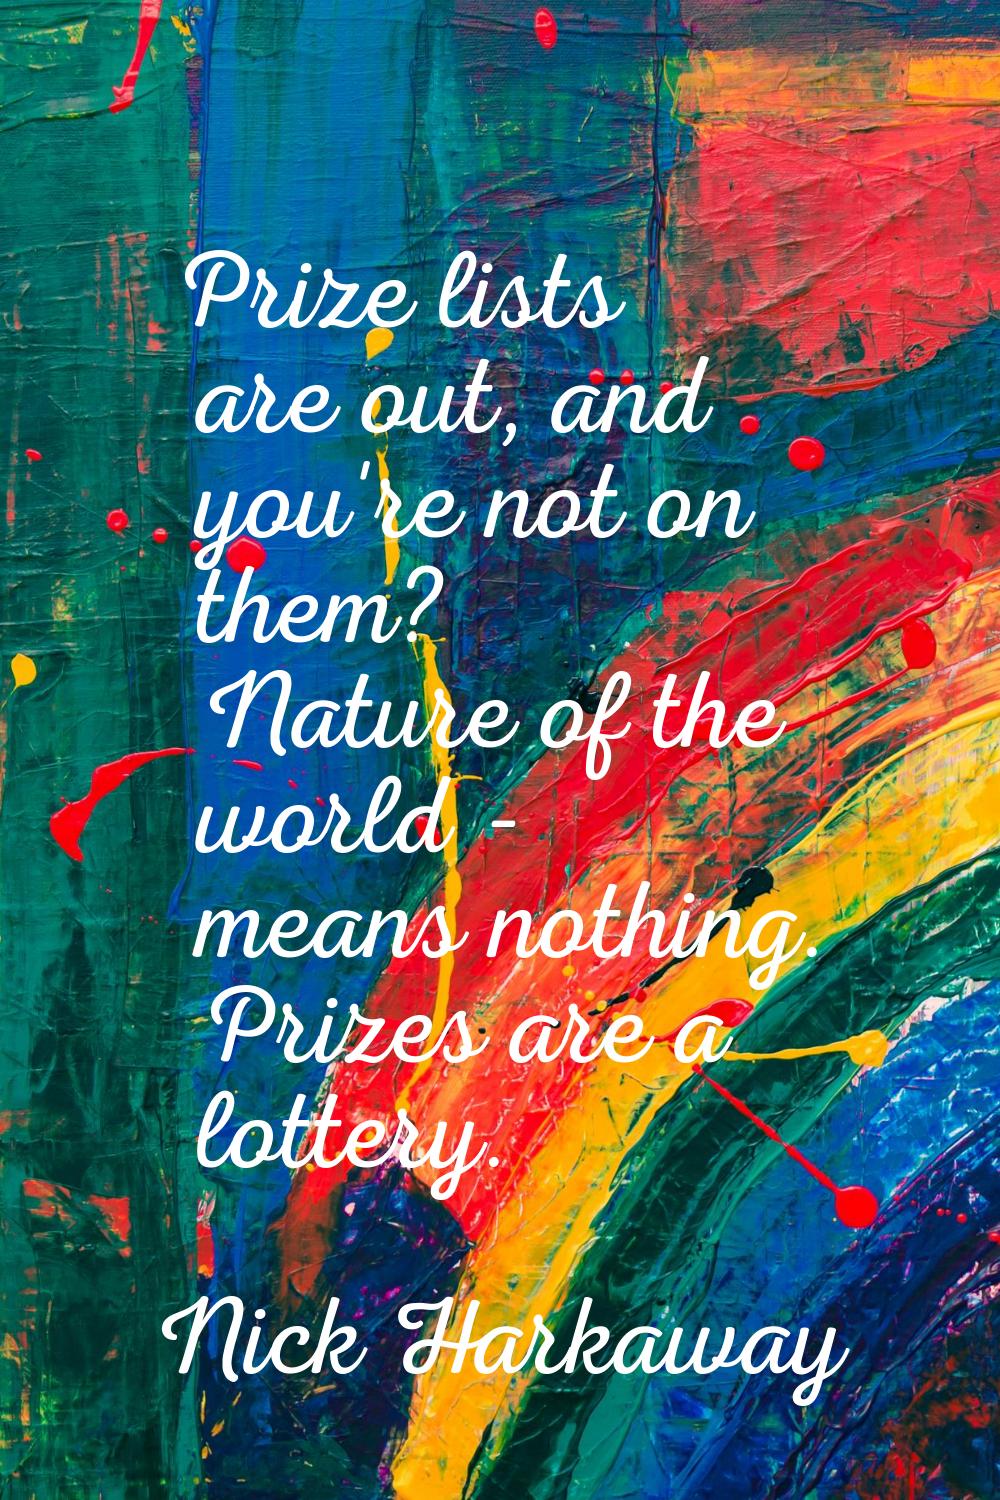 Prize lists are out, and you're not on them? Nature of the world - means nothing. Prizes are a lott